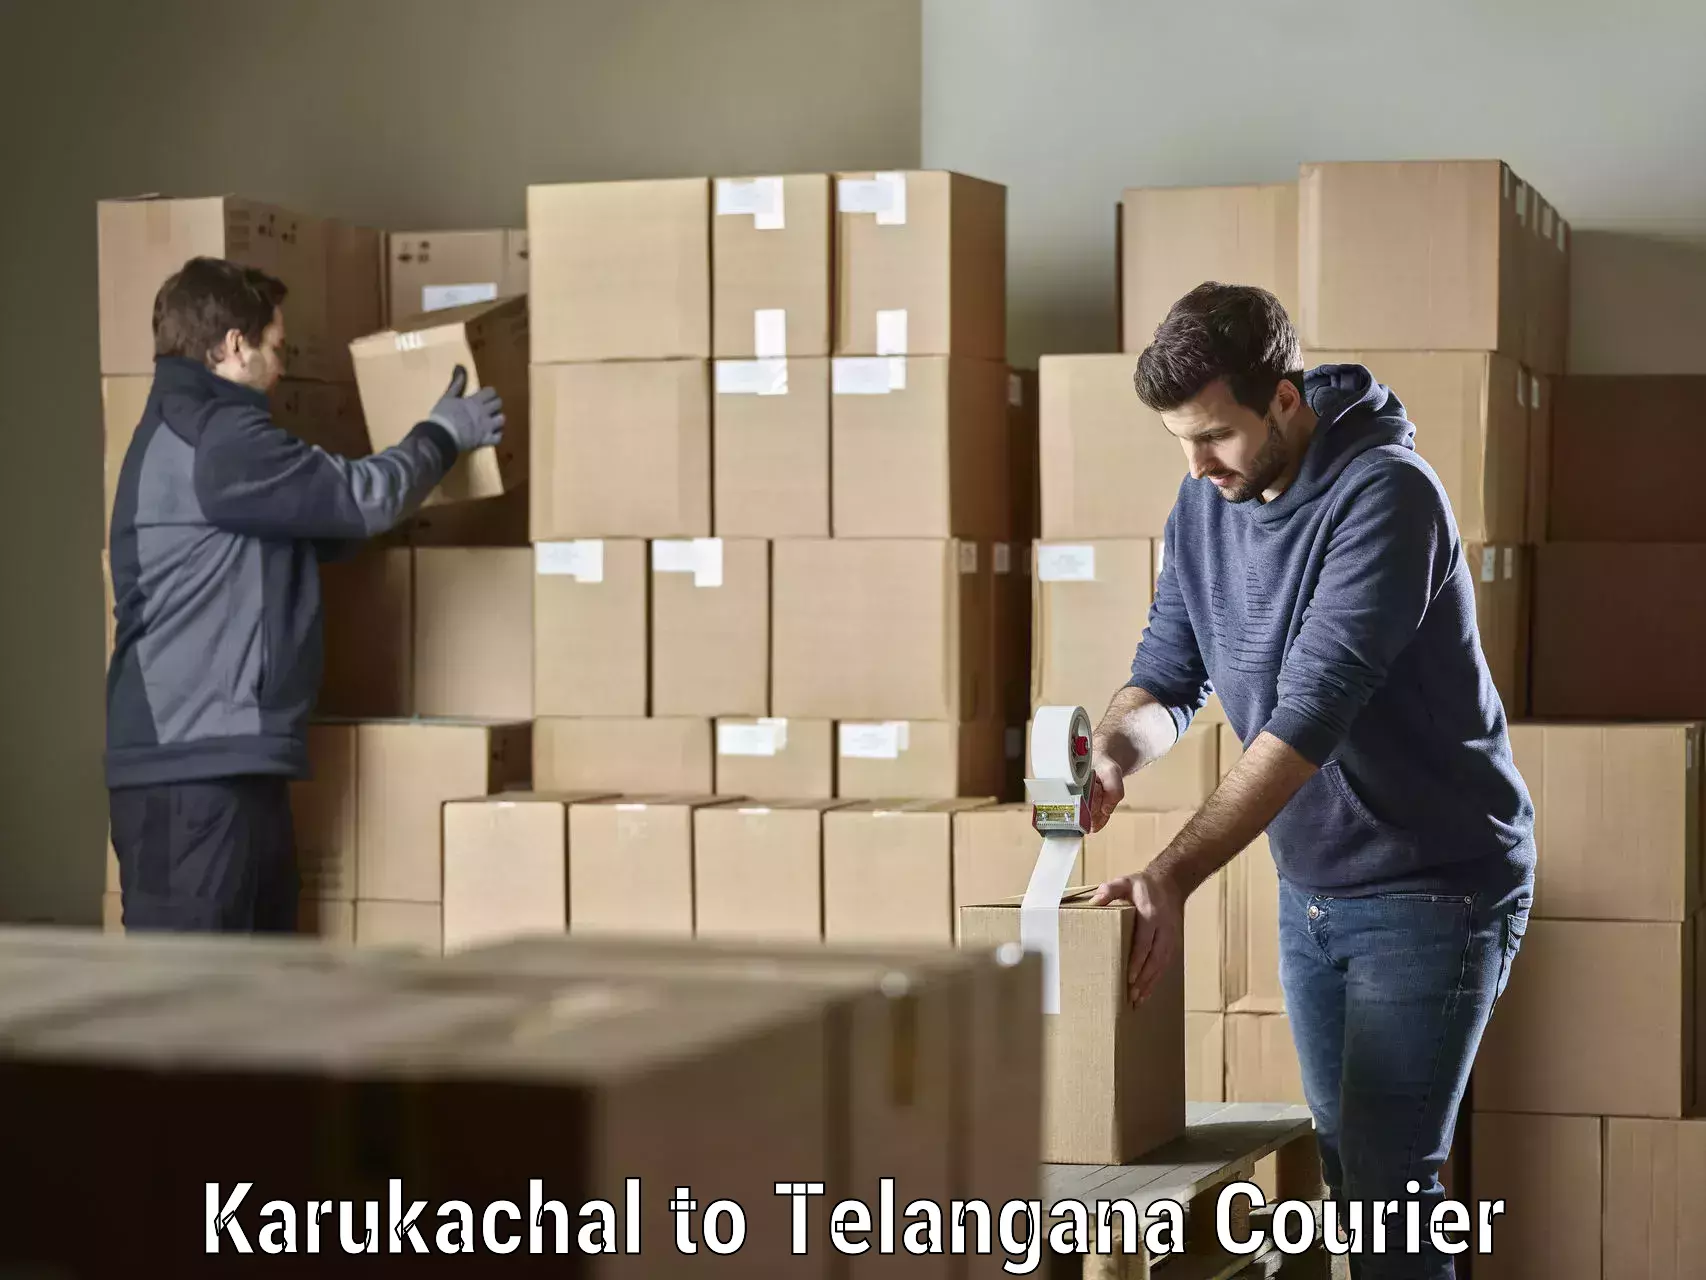 Full-service courier options Karukachal to Rangareddy